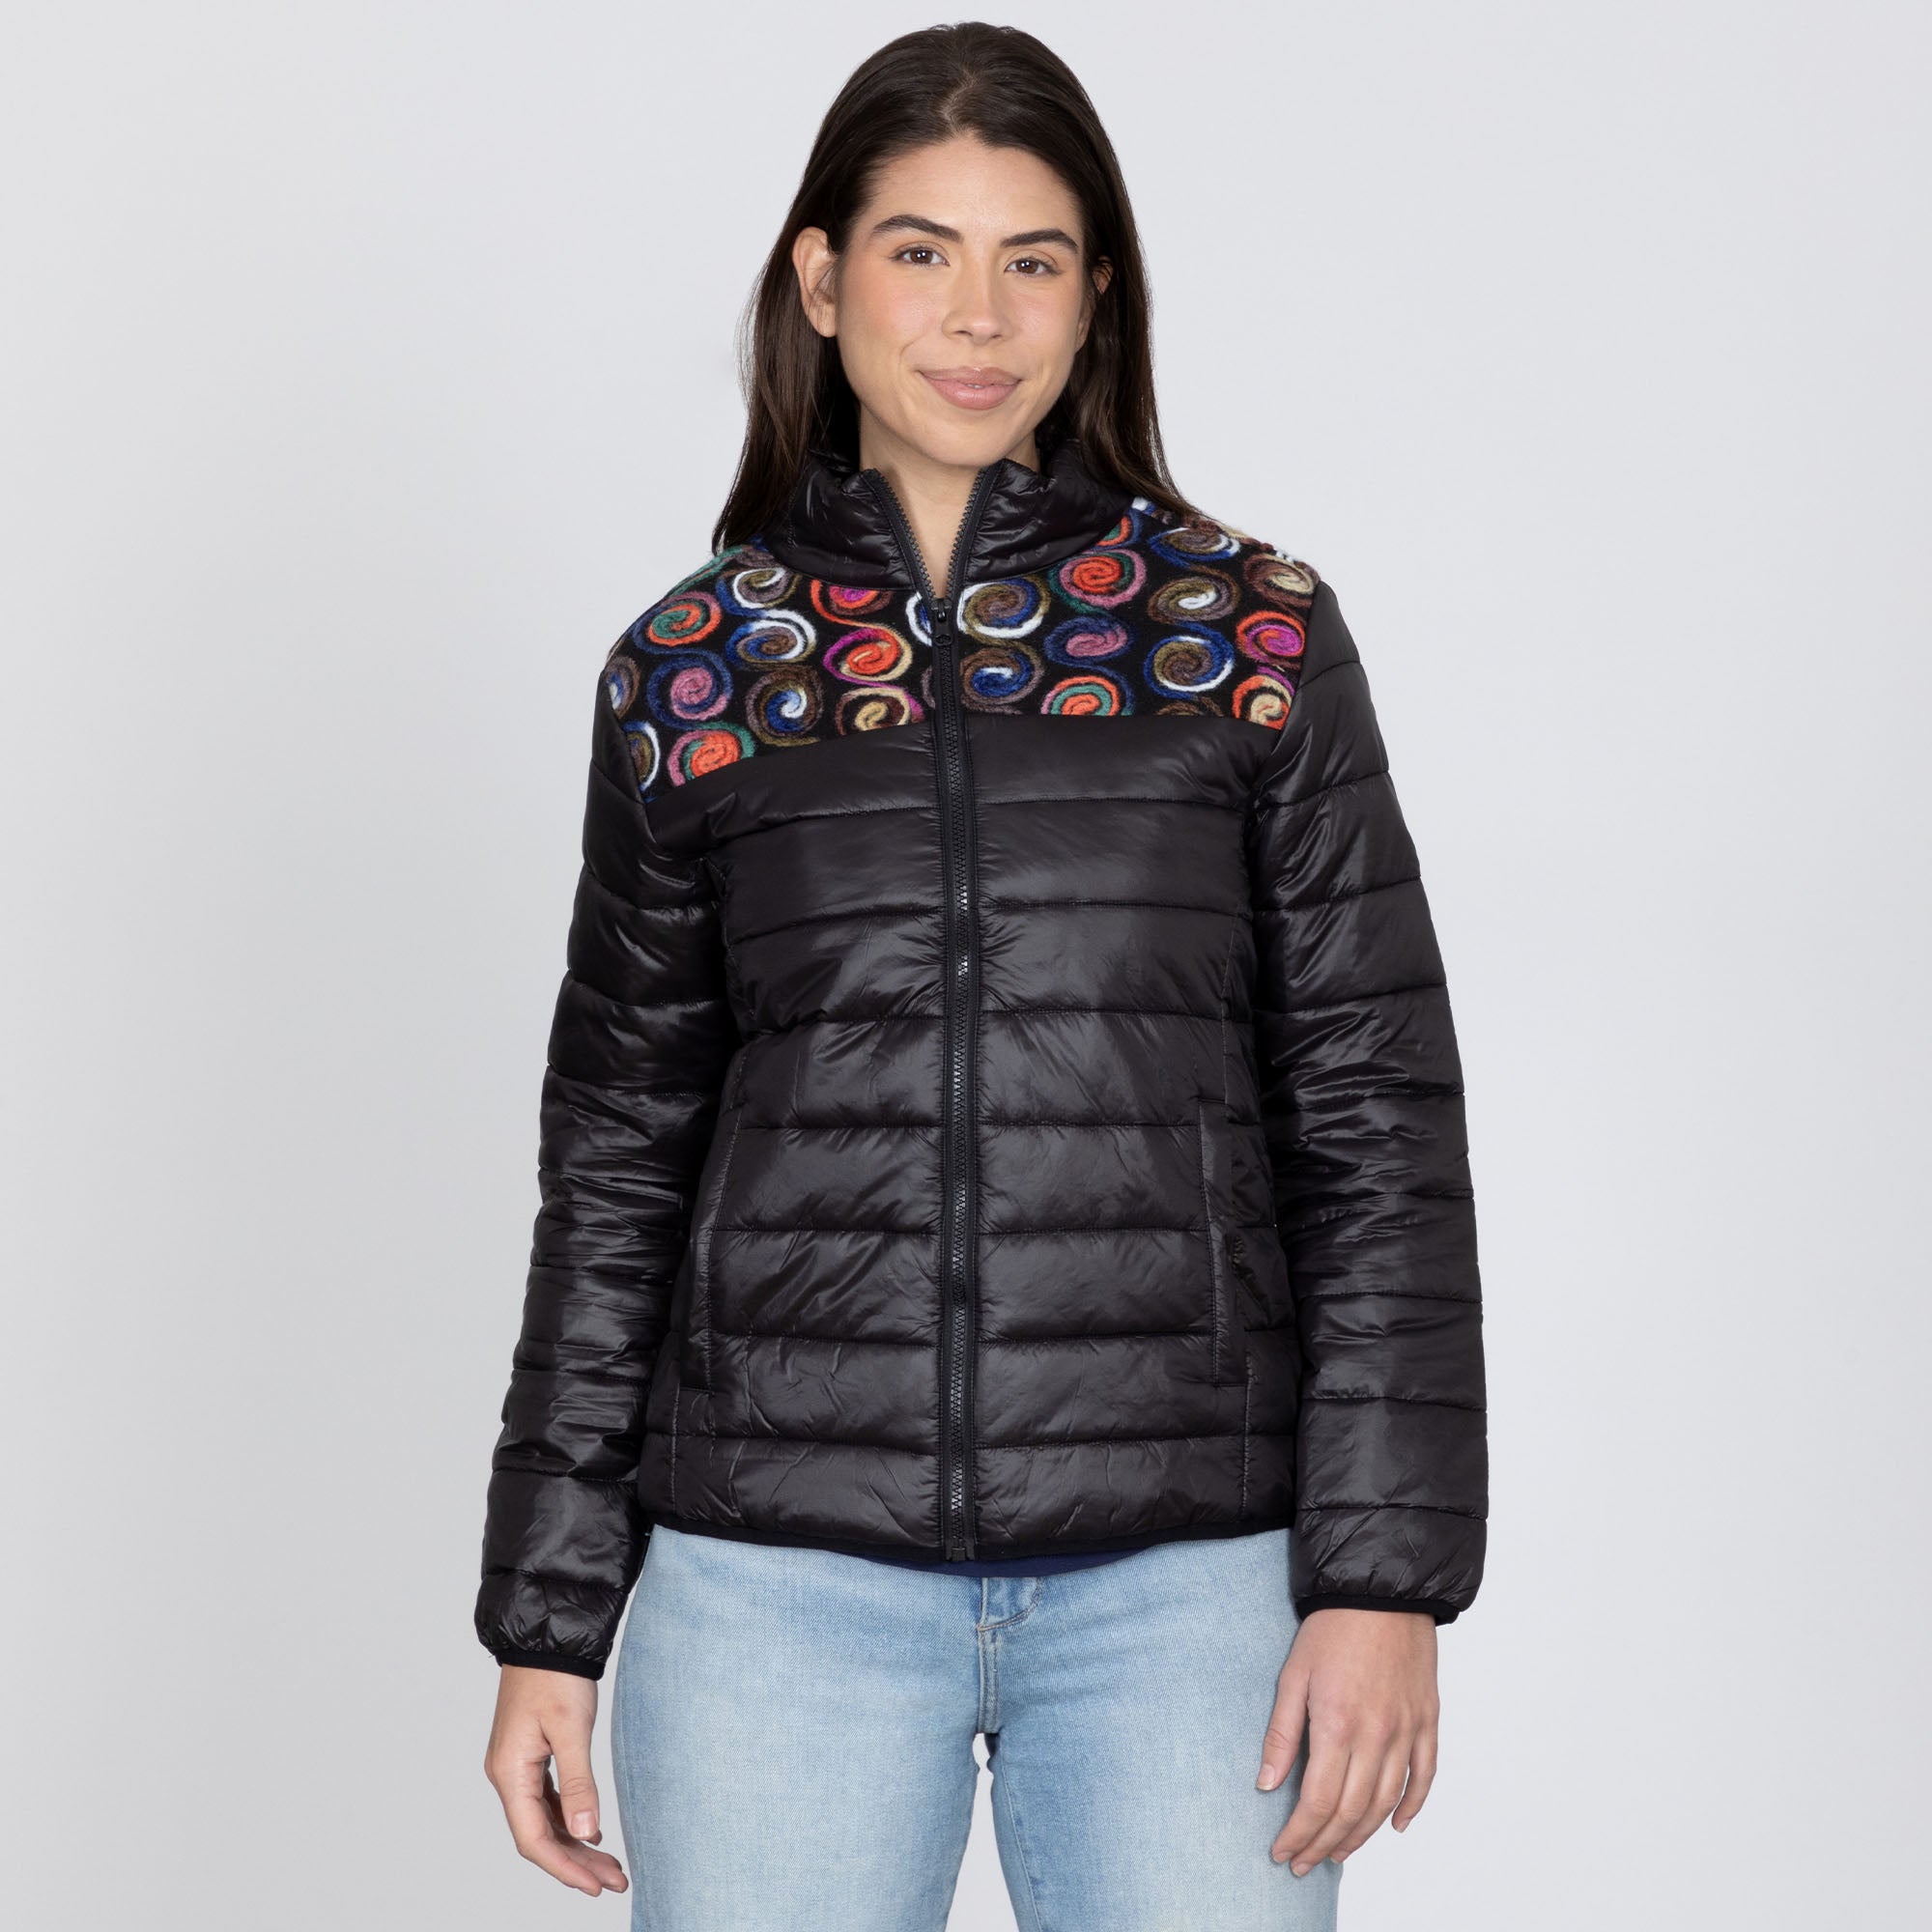 Mixed Fabric Embroidery Insulated Jacket - 2X